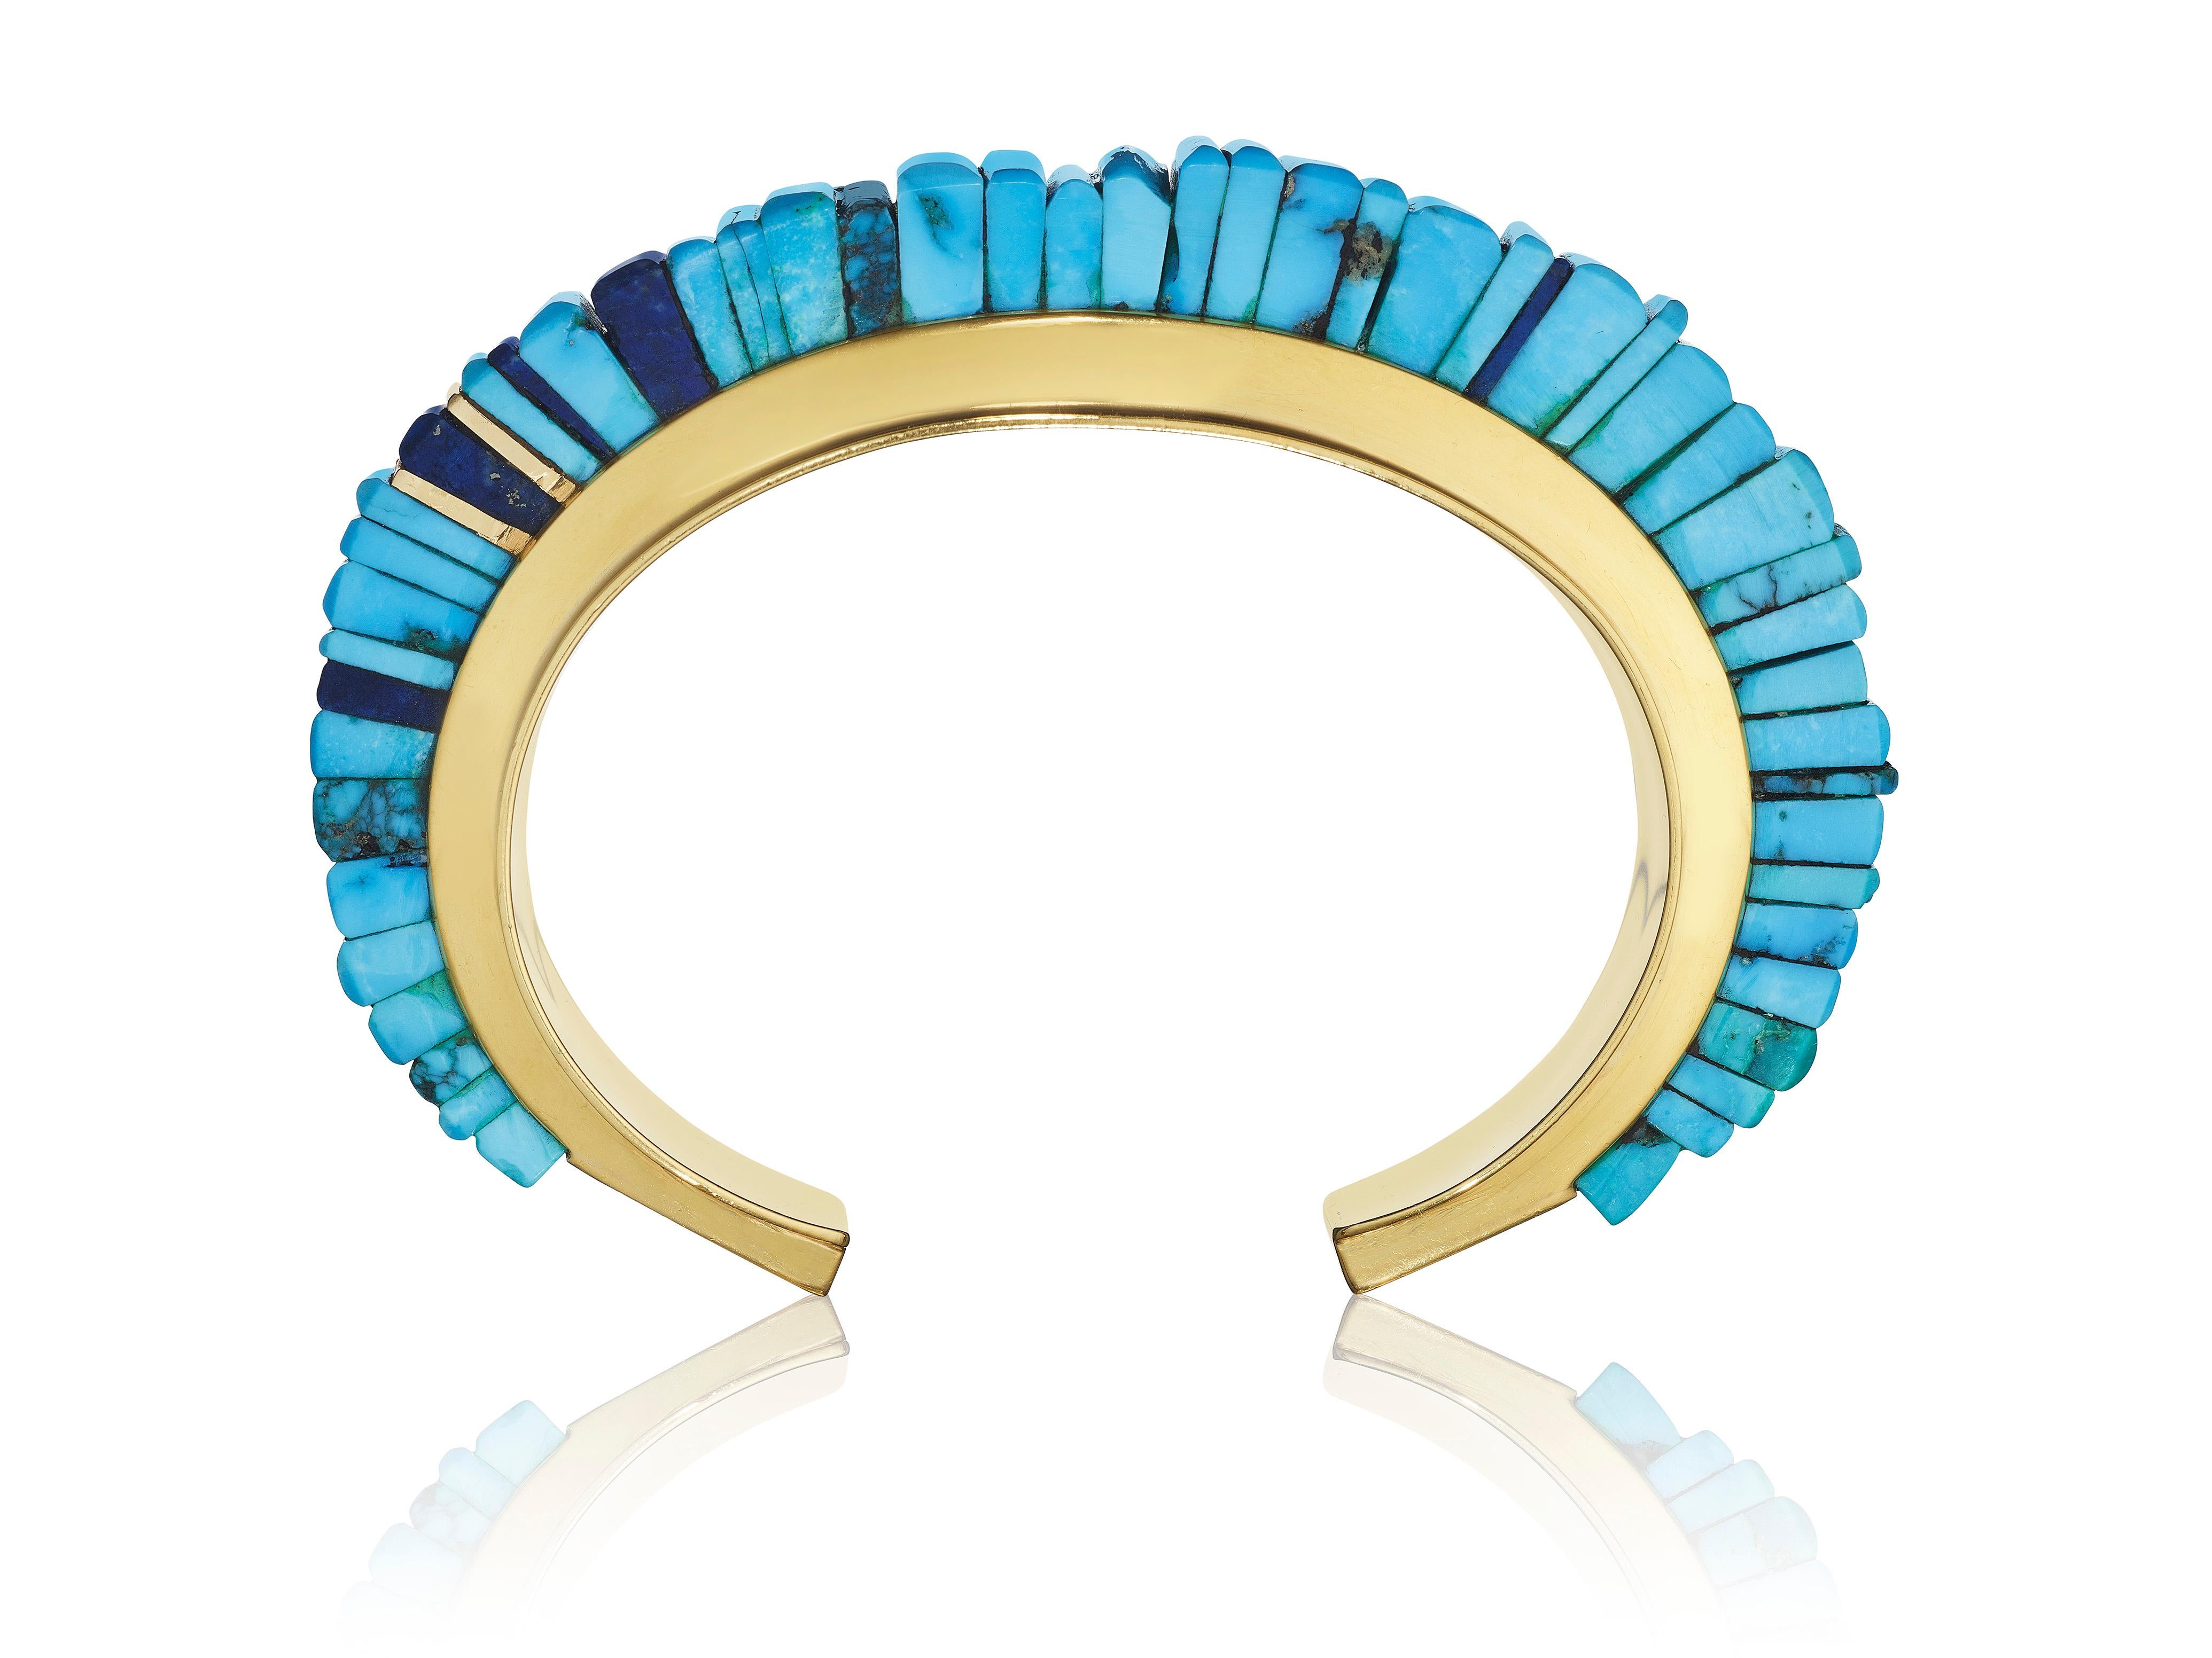 A bracelet composed of stacked turquoise segments of varying widths set atop the cuff, mixed with 4 lapis lazuli segments and two yellow gold segments; mounted in 18-karat yellow gold 
• Signed Loloma
• Measurements: 3 1/4 x 2 1/2 x ¾